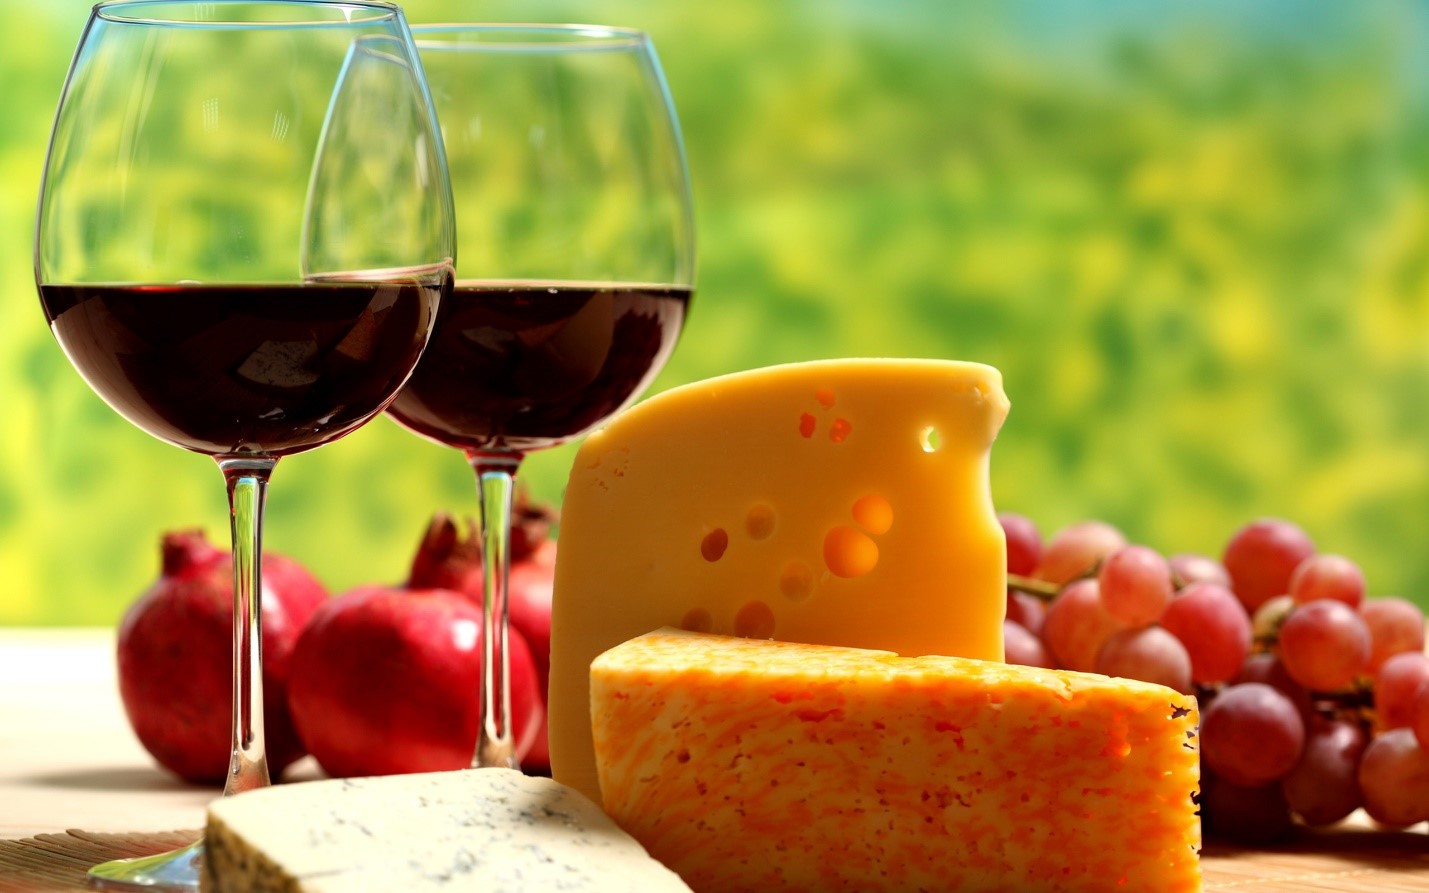 Learn Wine & Cheese 101 At Murray’s Cheese Shop In NY On September 10th